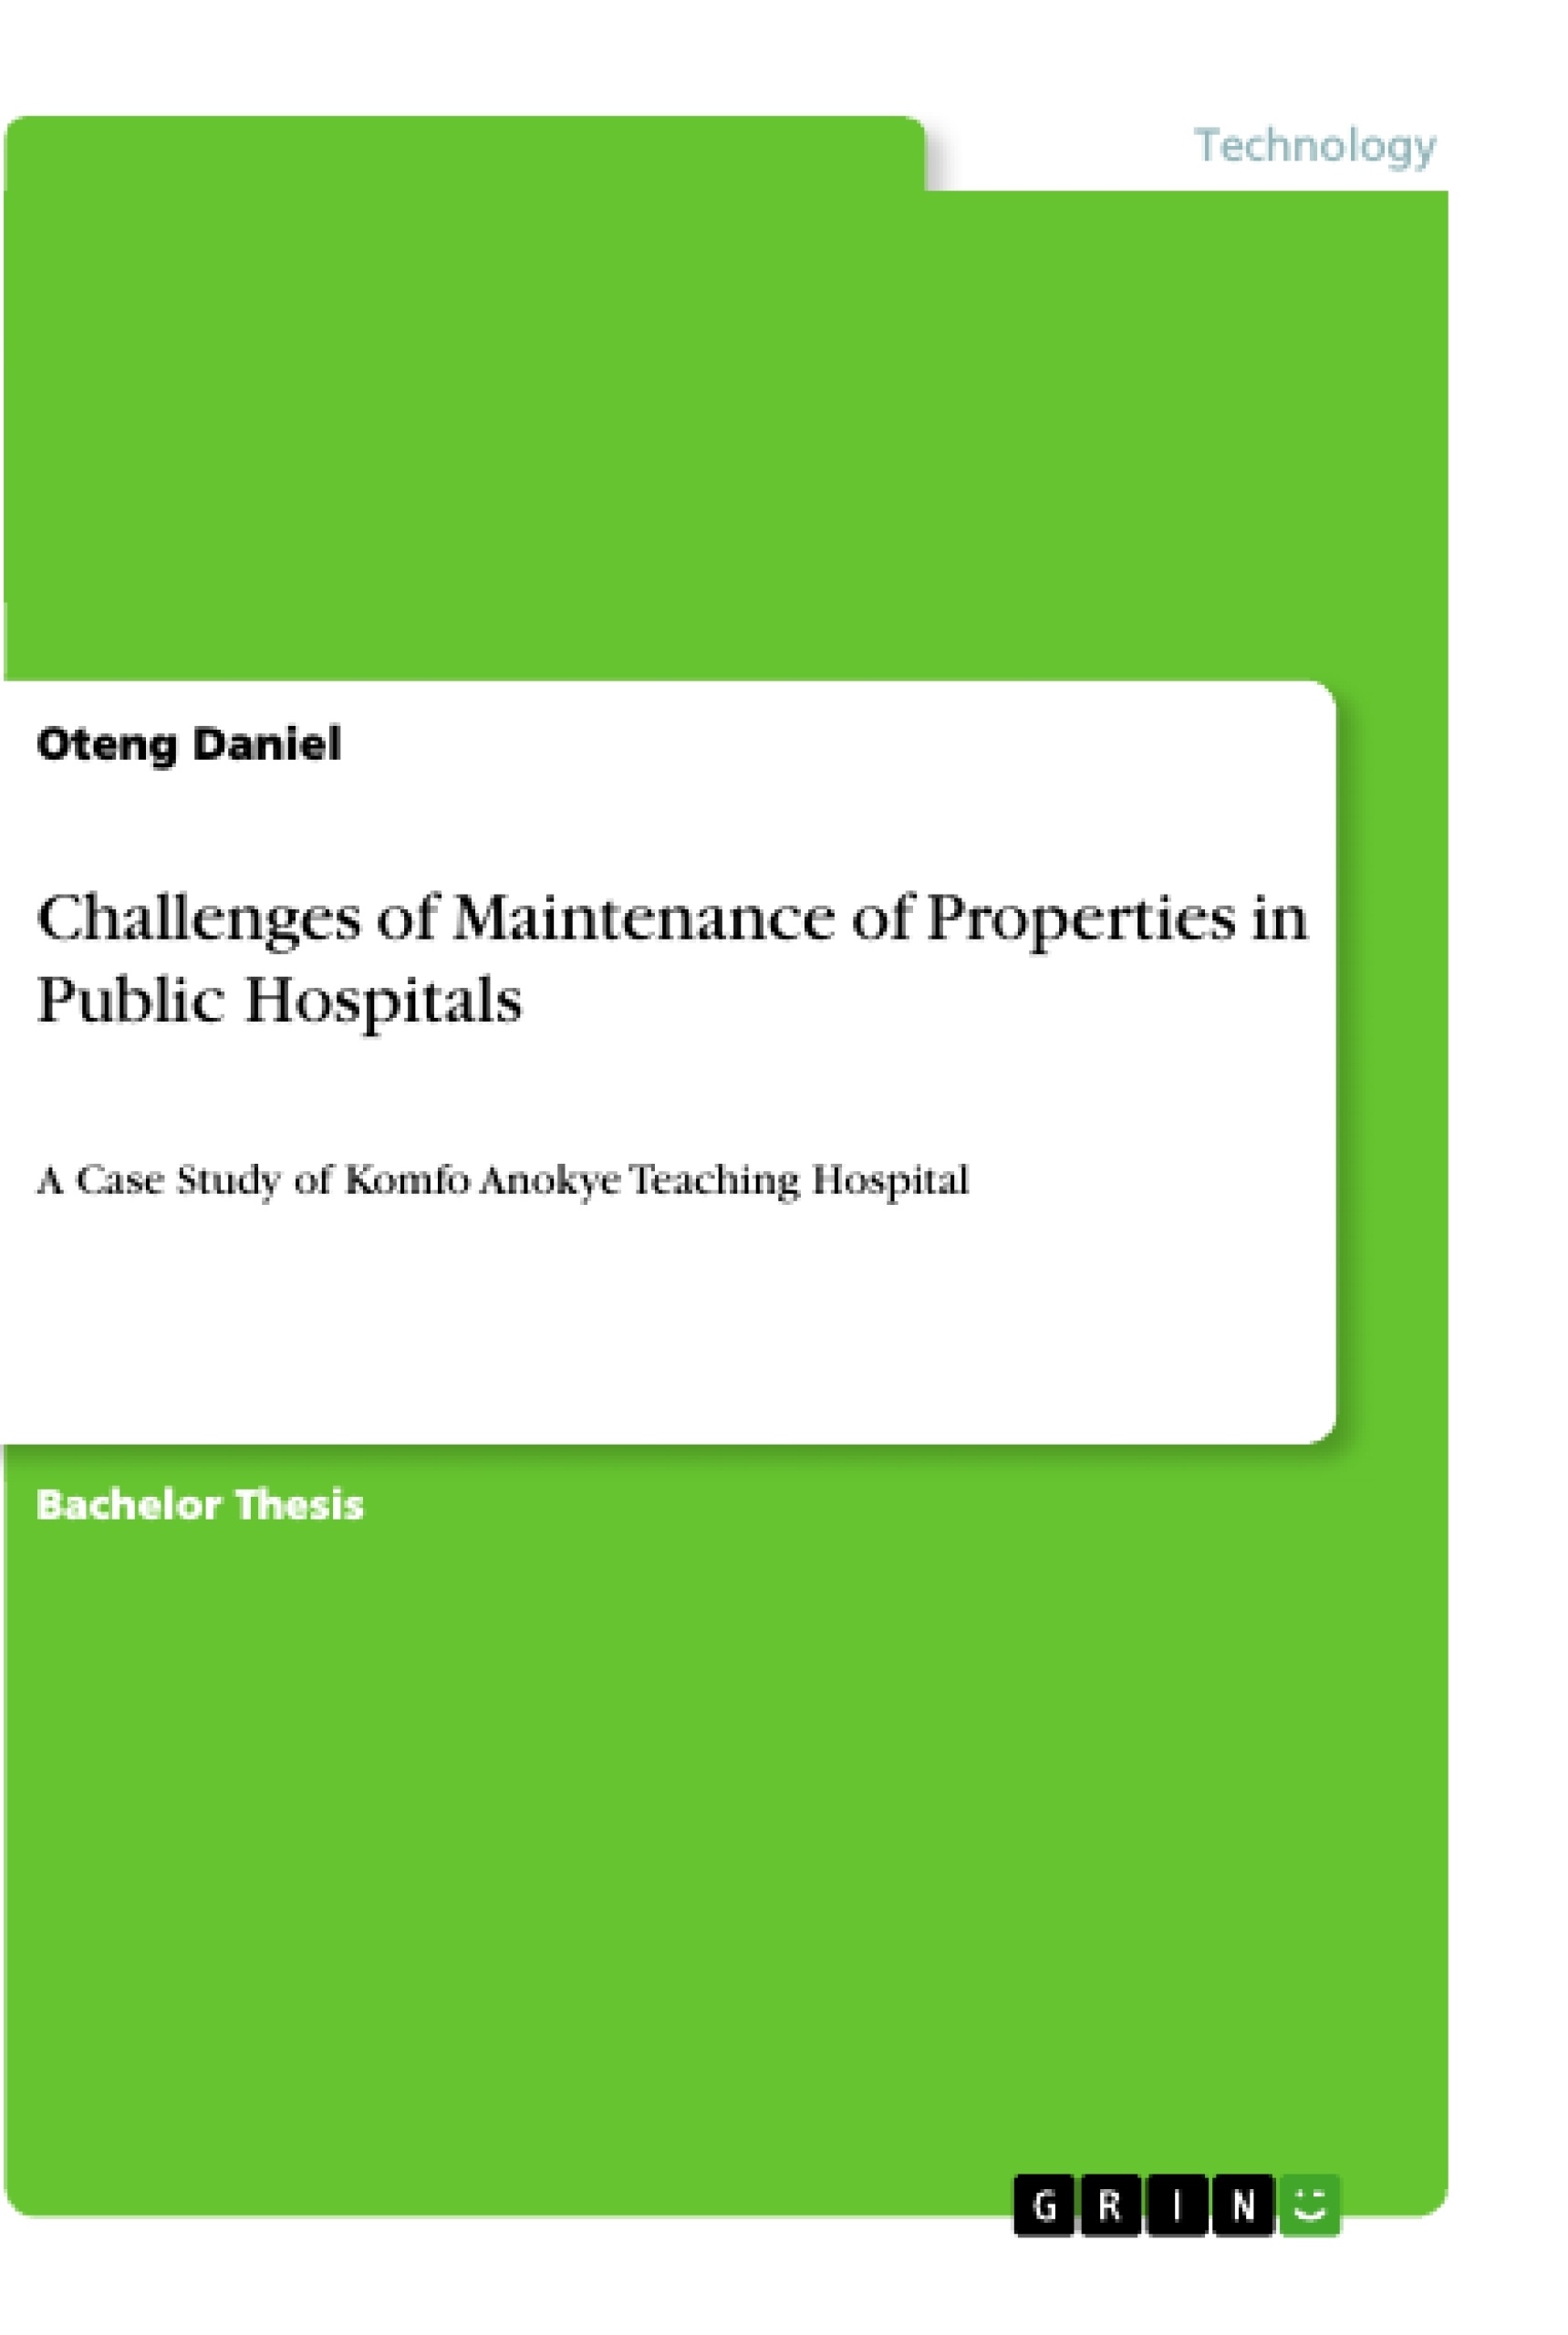 Título: Challenges of Maintenance of Properties in Public Hospitals